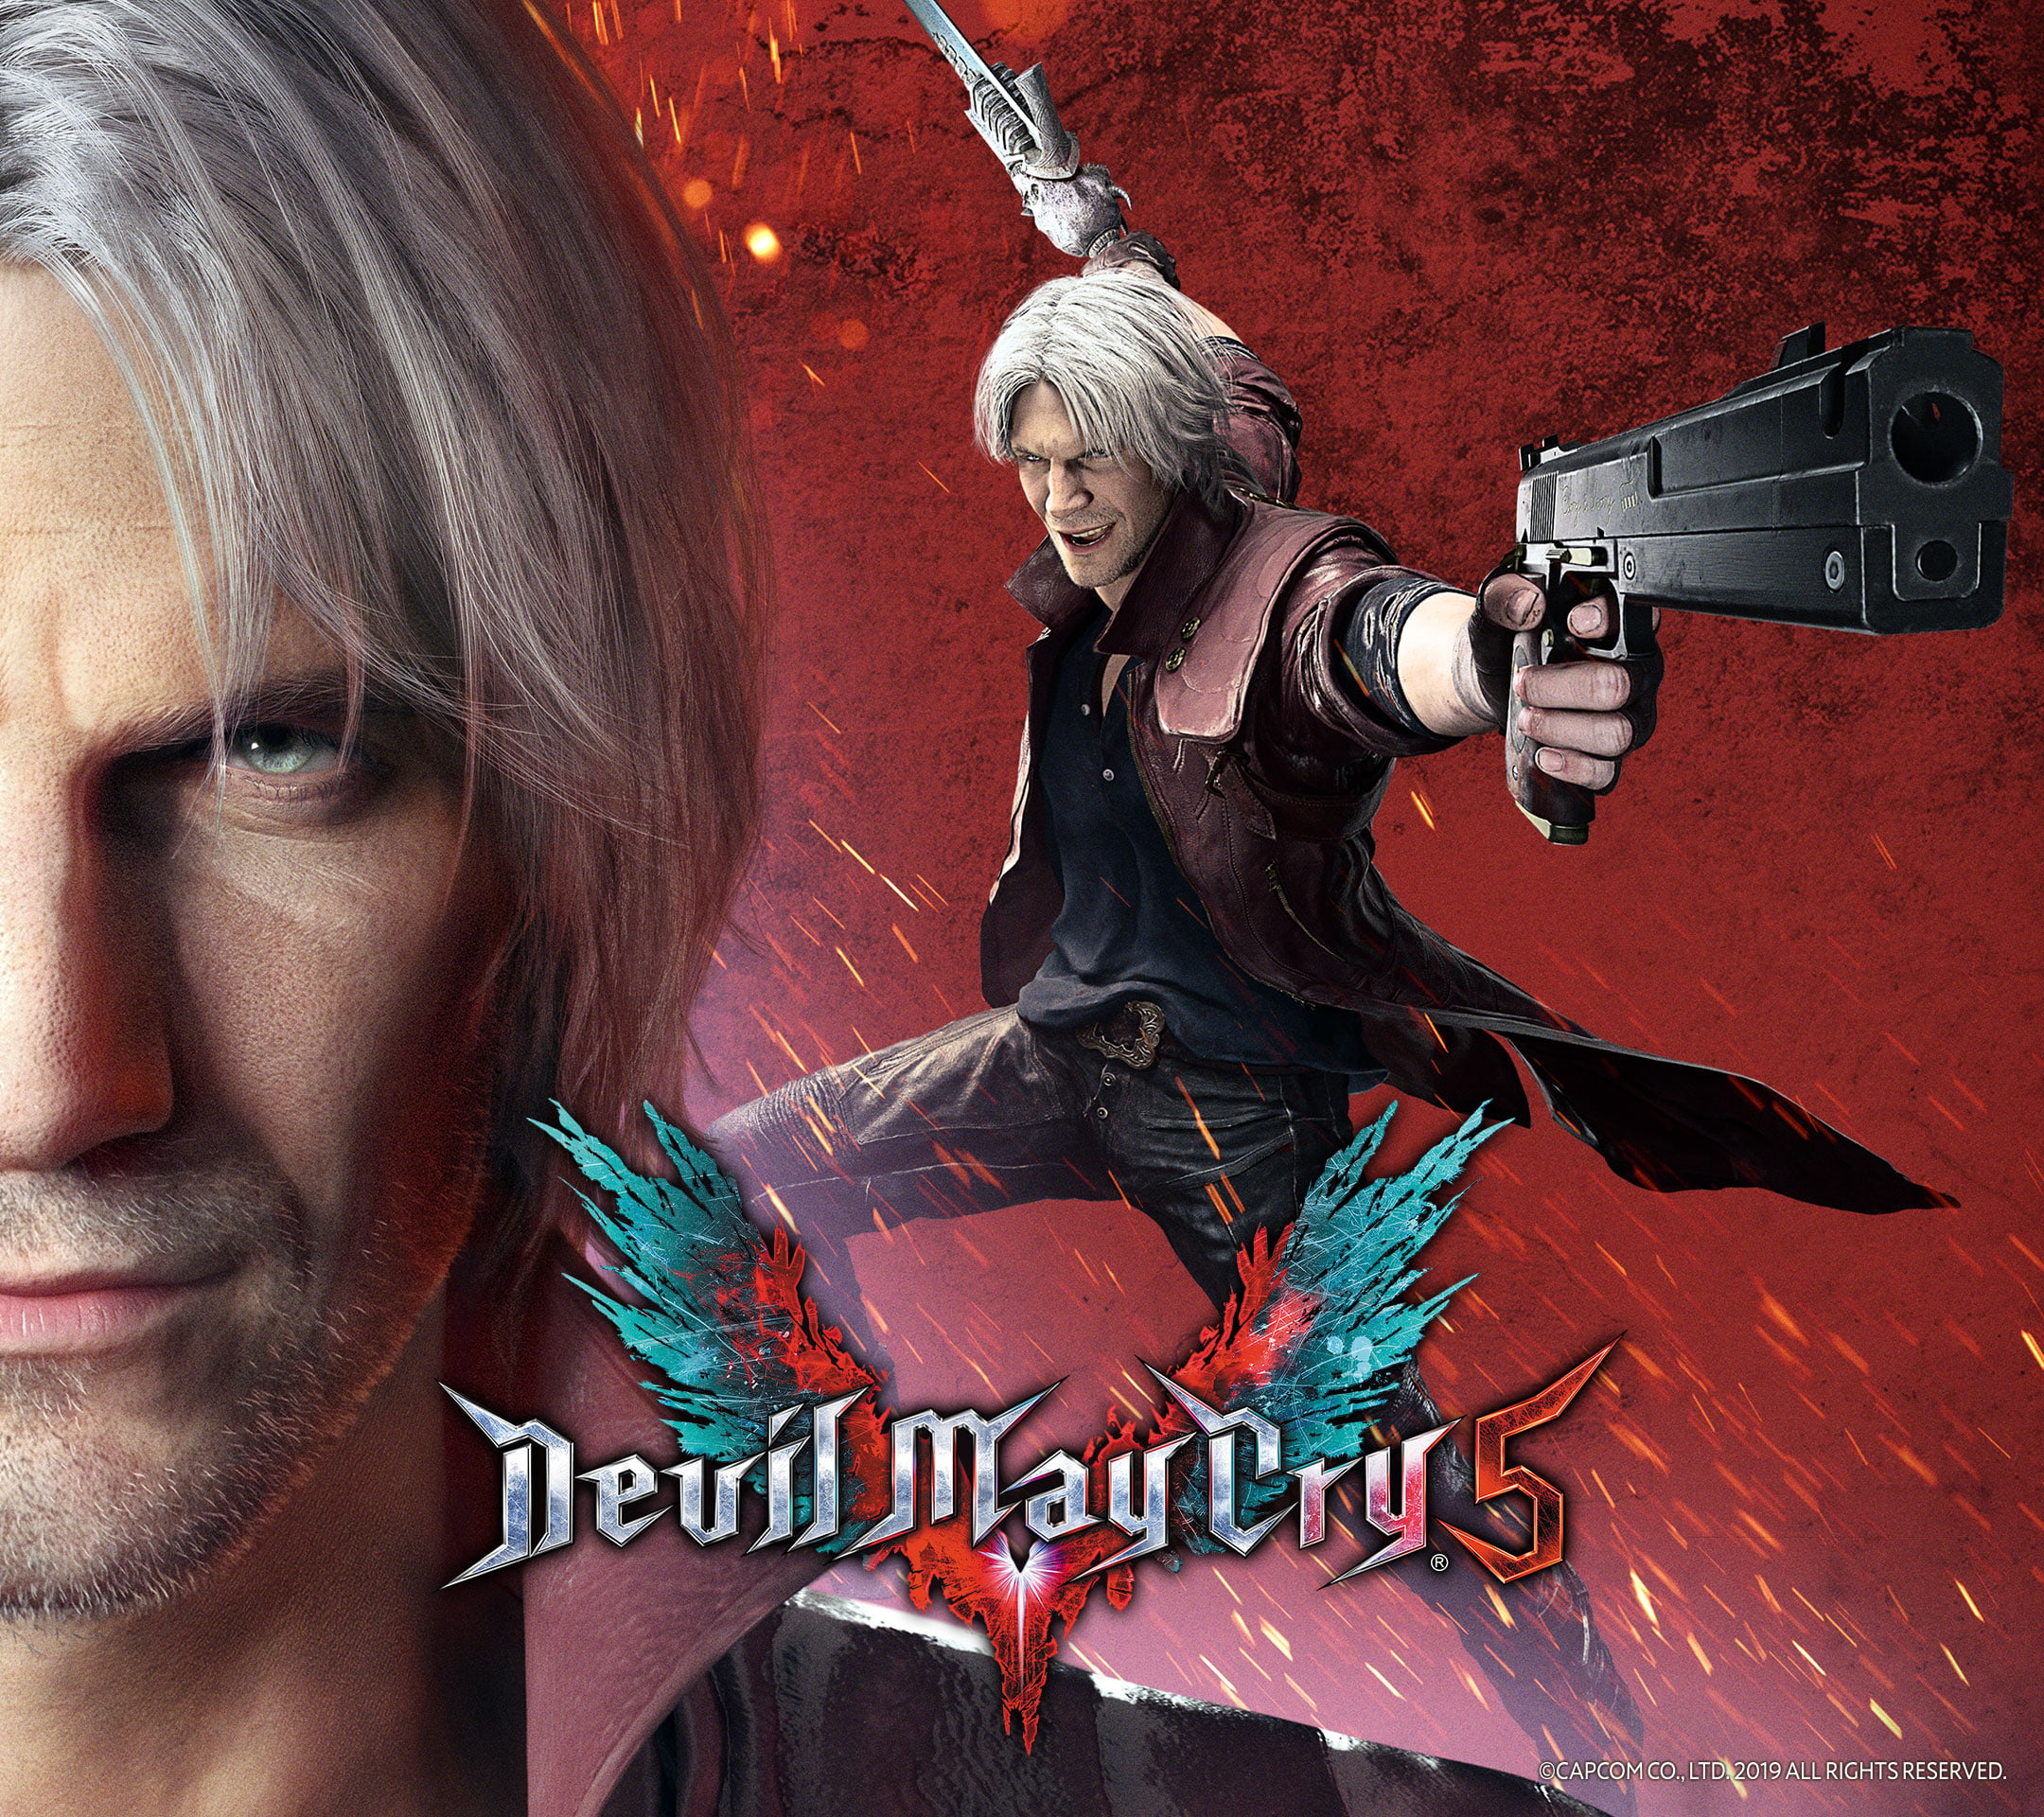 Devil May Cry 5, Dante (Devil May Cry)